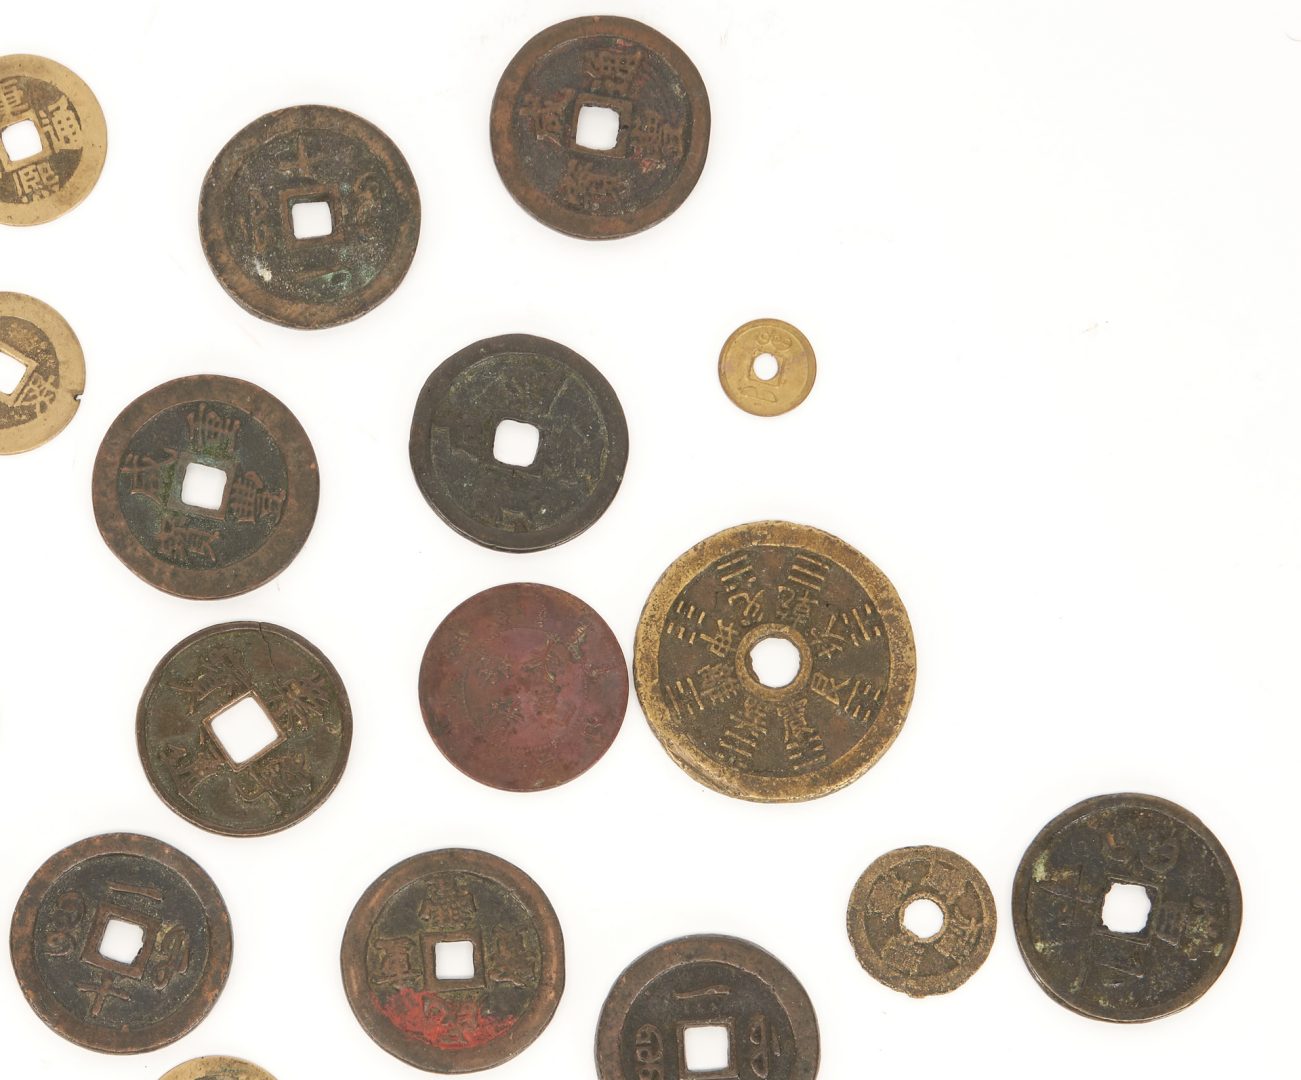 Lot 307: 40 Asian Coins, incl. Chinese "Cash"